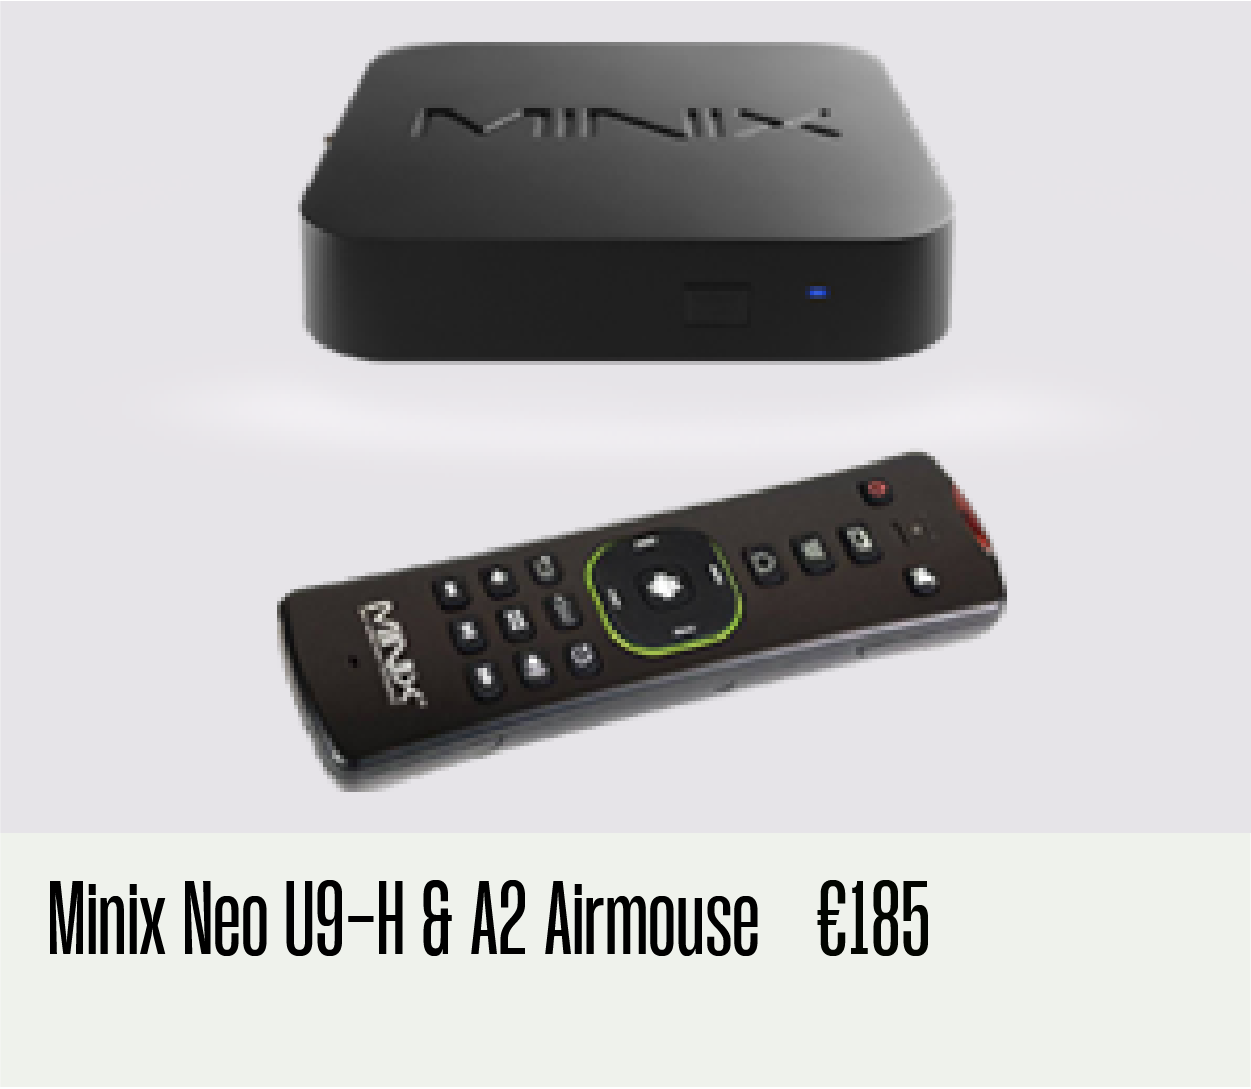 Minix Neo U9-H with A2 Airmouse